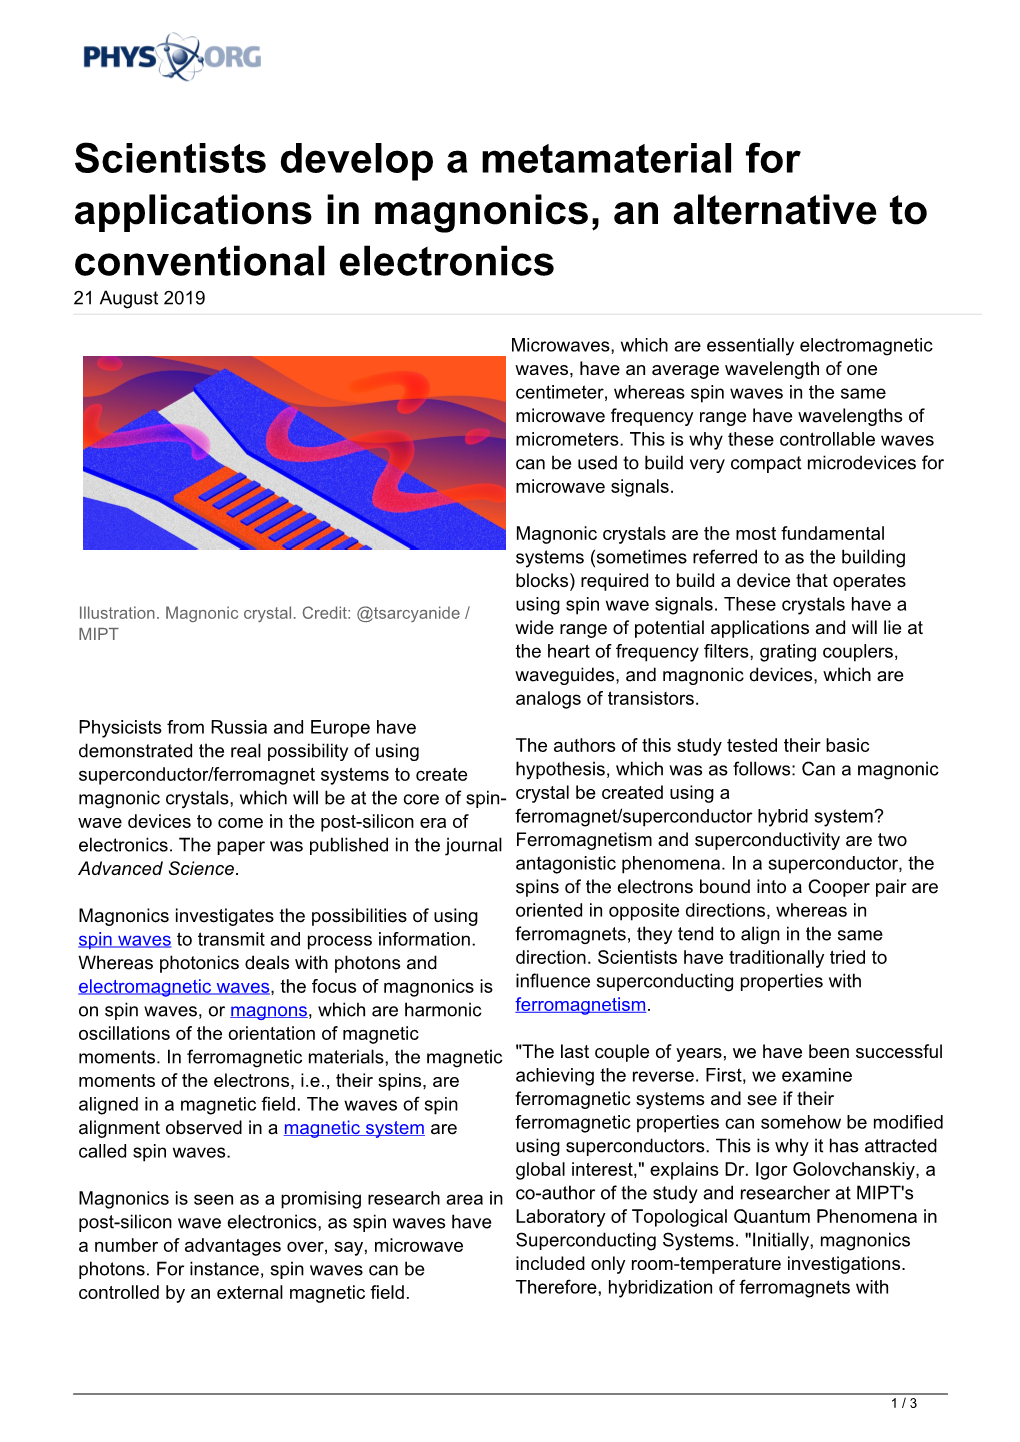 Scientists Develop a Metamaterial for Applications in Magnonics, an Alternative to Conventional Electronics 21 August 2019